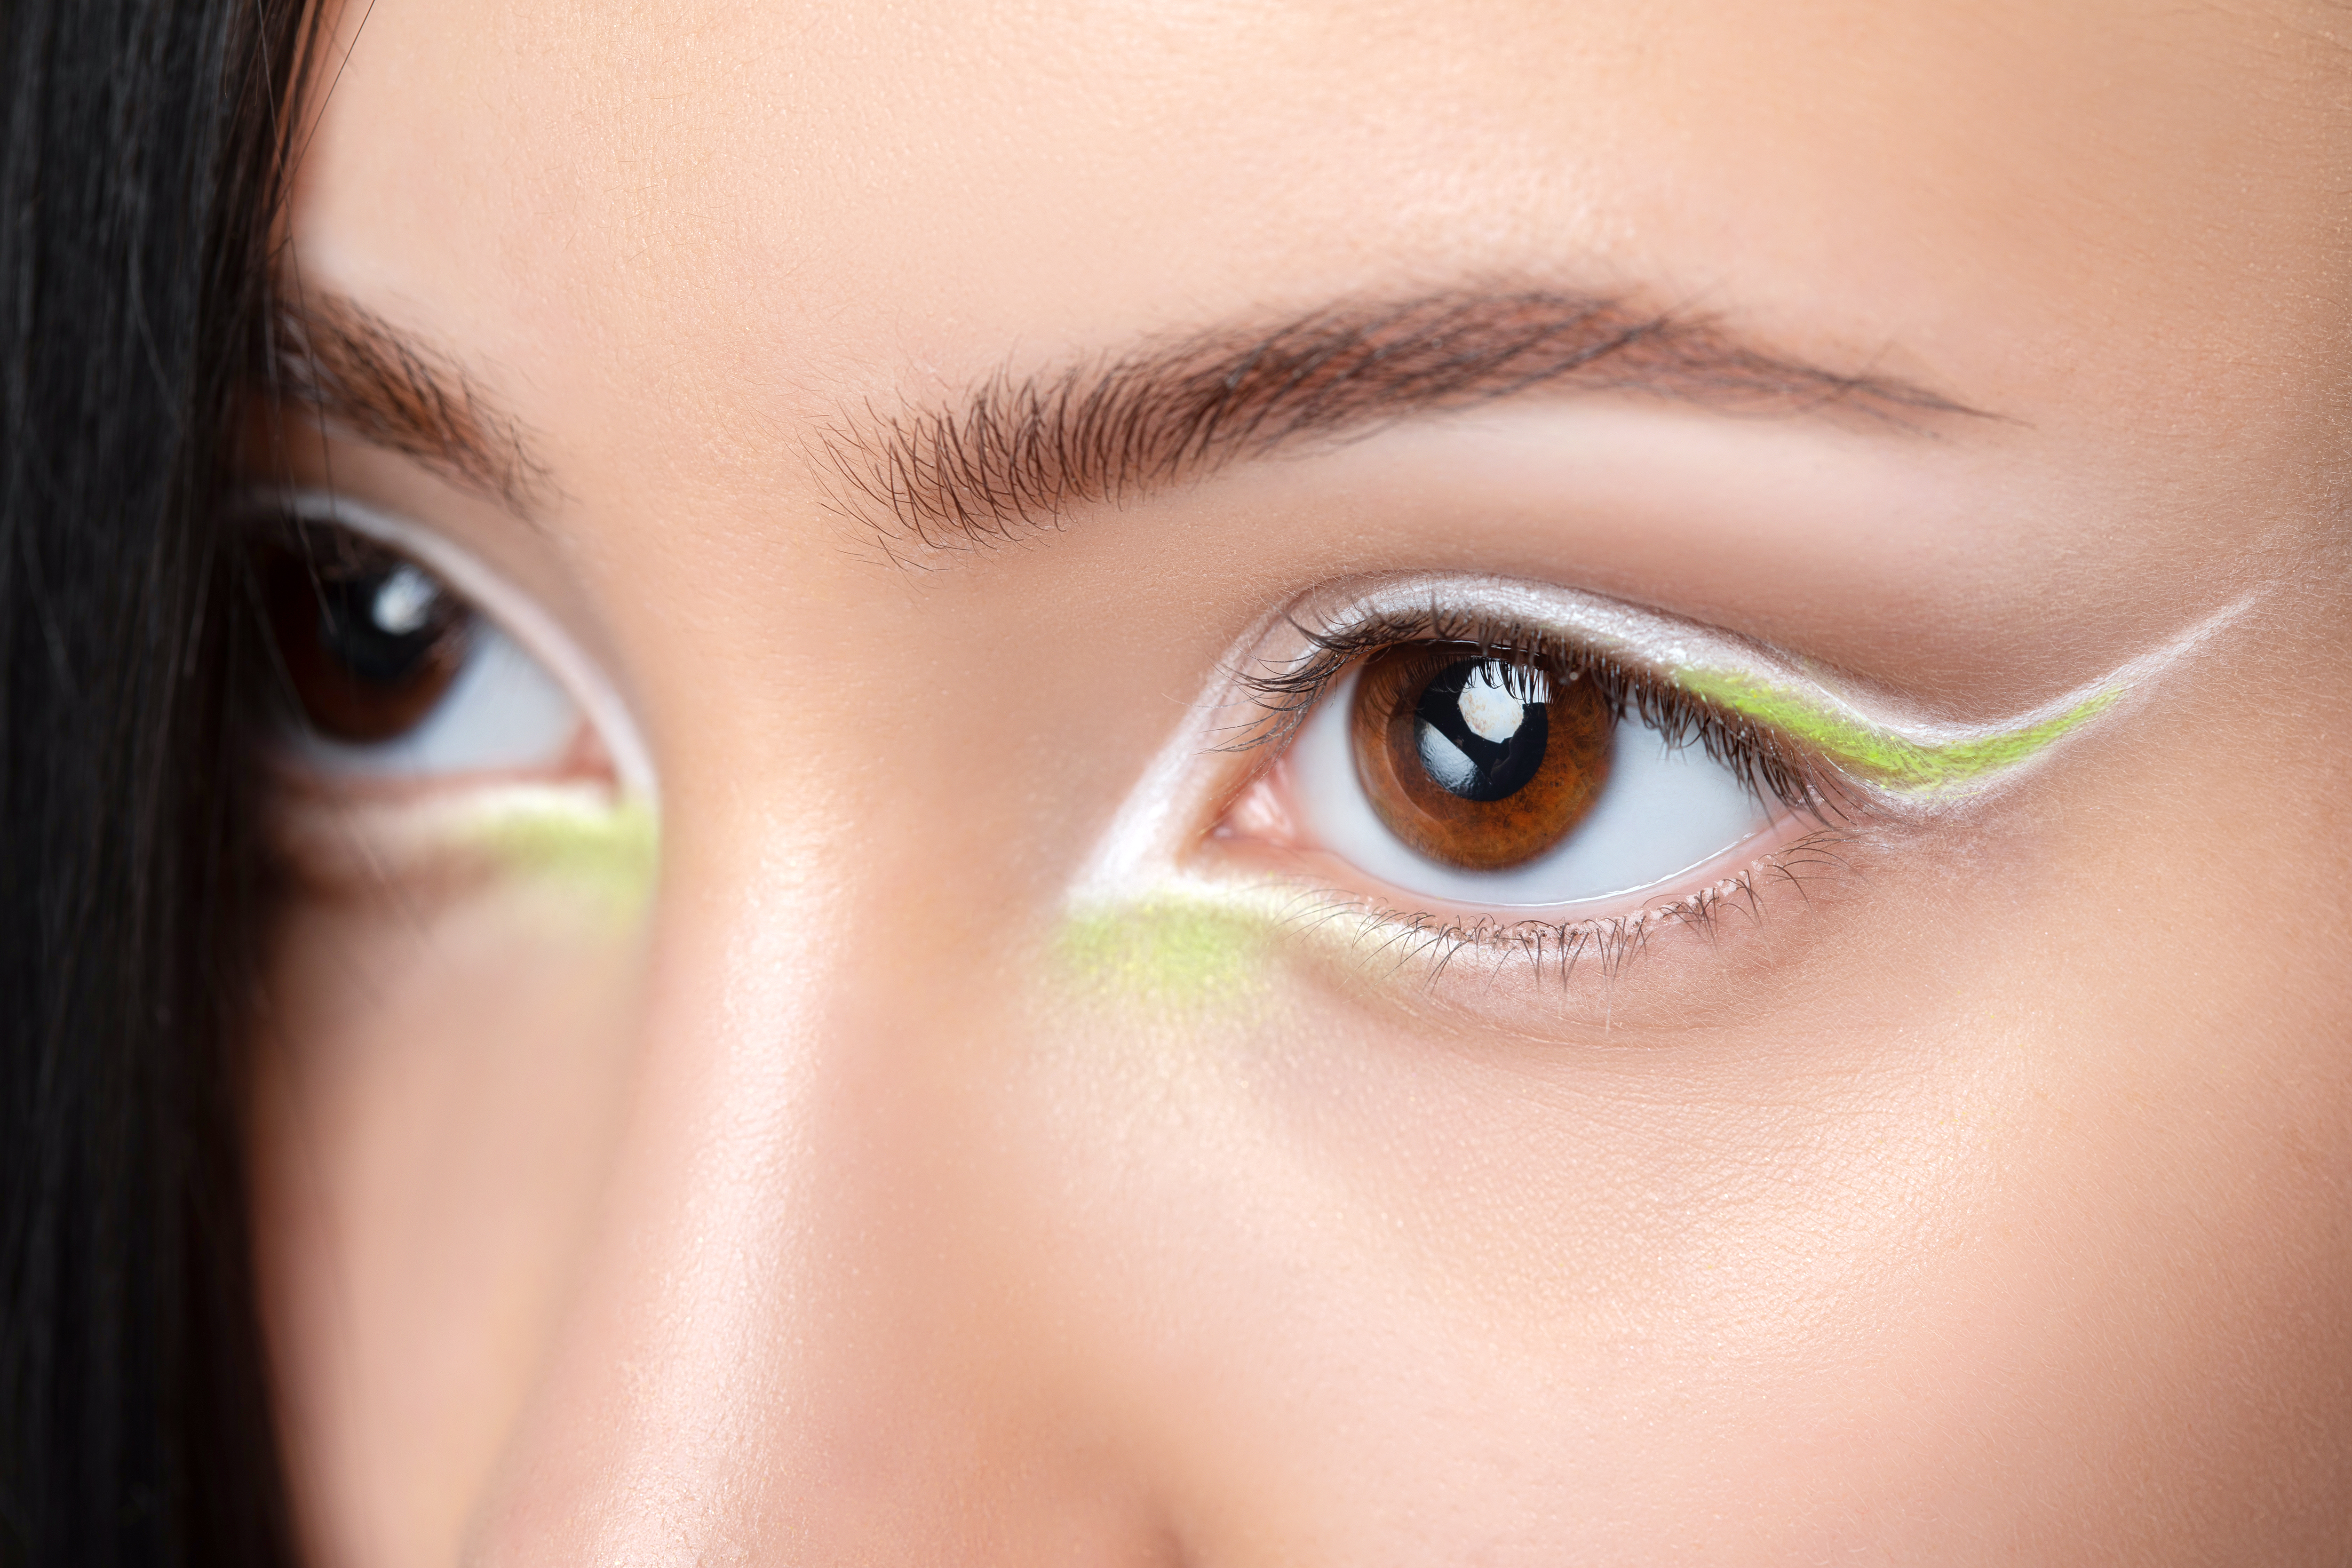 A model with green and white eye makeup. | Source: Getty Images